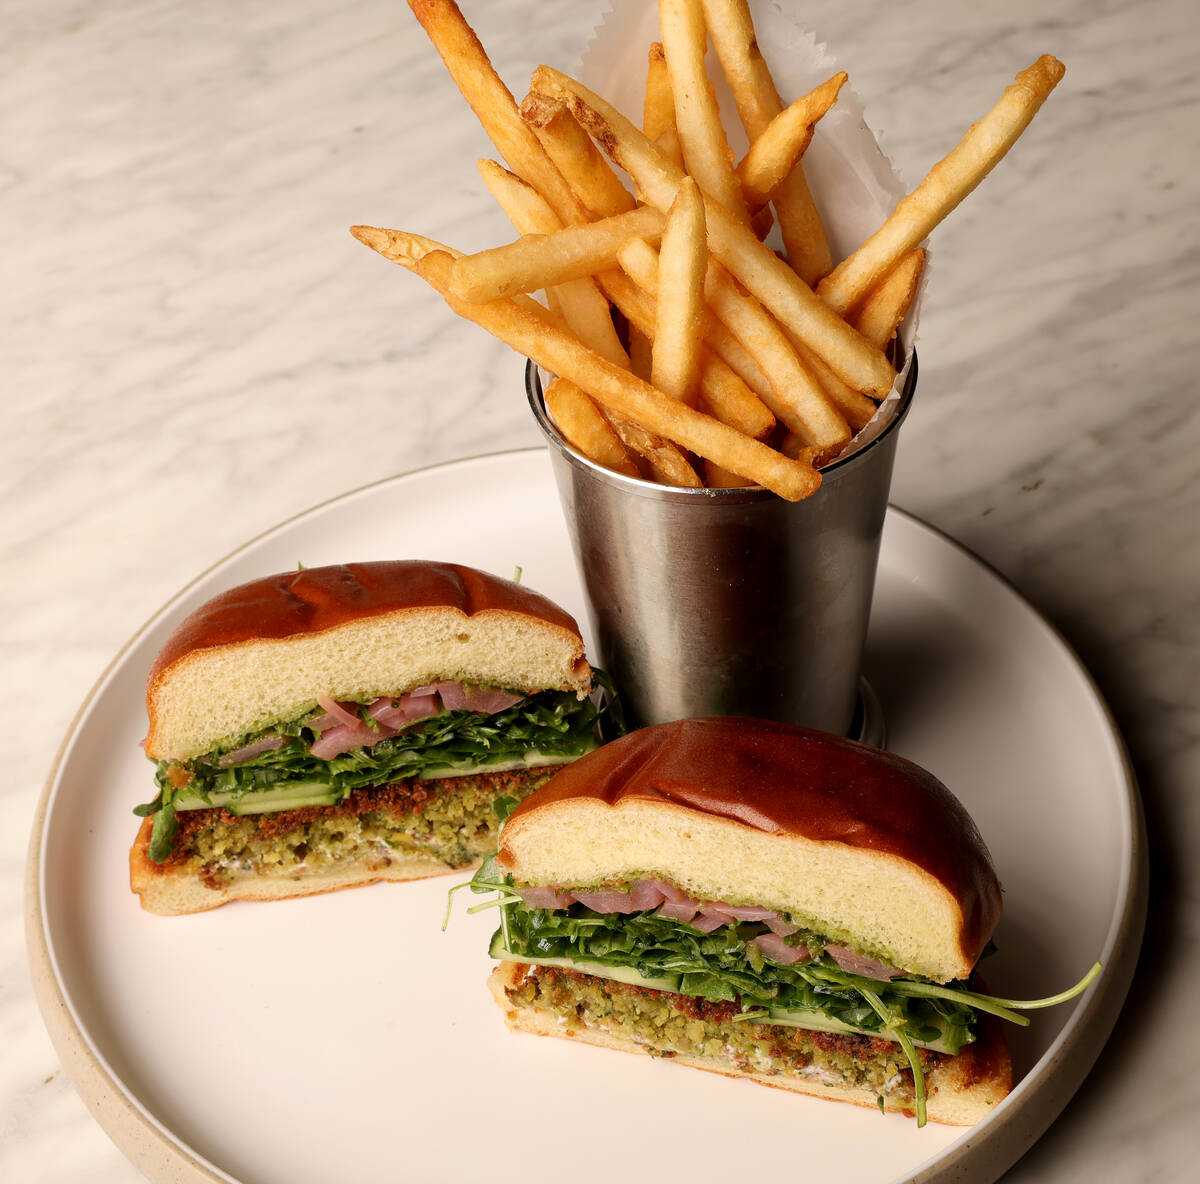 Falafel burger is offered at Como bar and restaurant at the Bellagio pool complex in Las Vegas ...